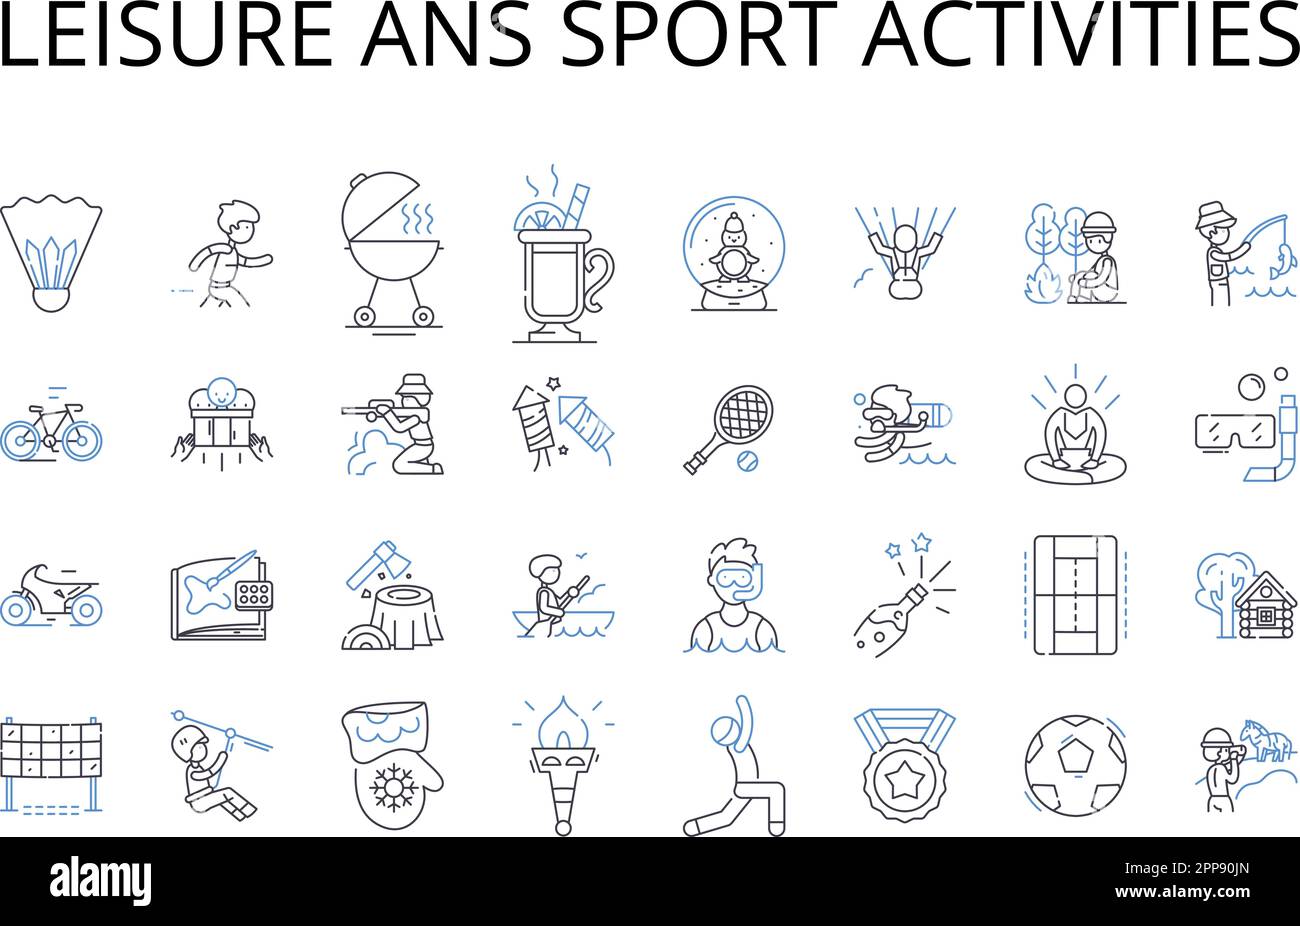 Leisure ans sport activities line icons collection. Recreation, Entertainment, Pursuits, Amusements, Hobbies, Pastimes, Games vector and linear Stock Vector